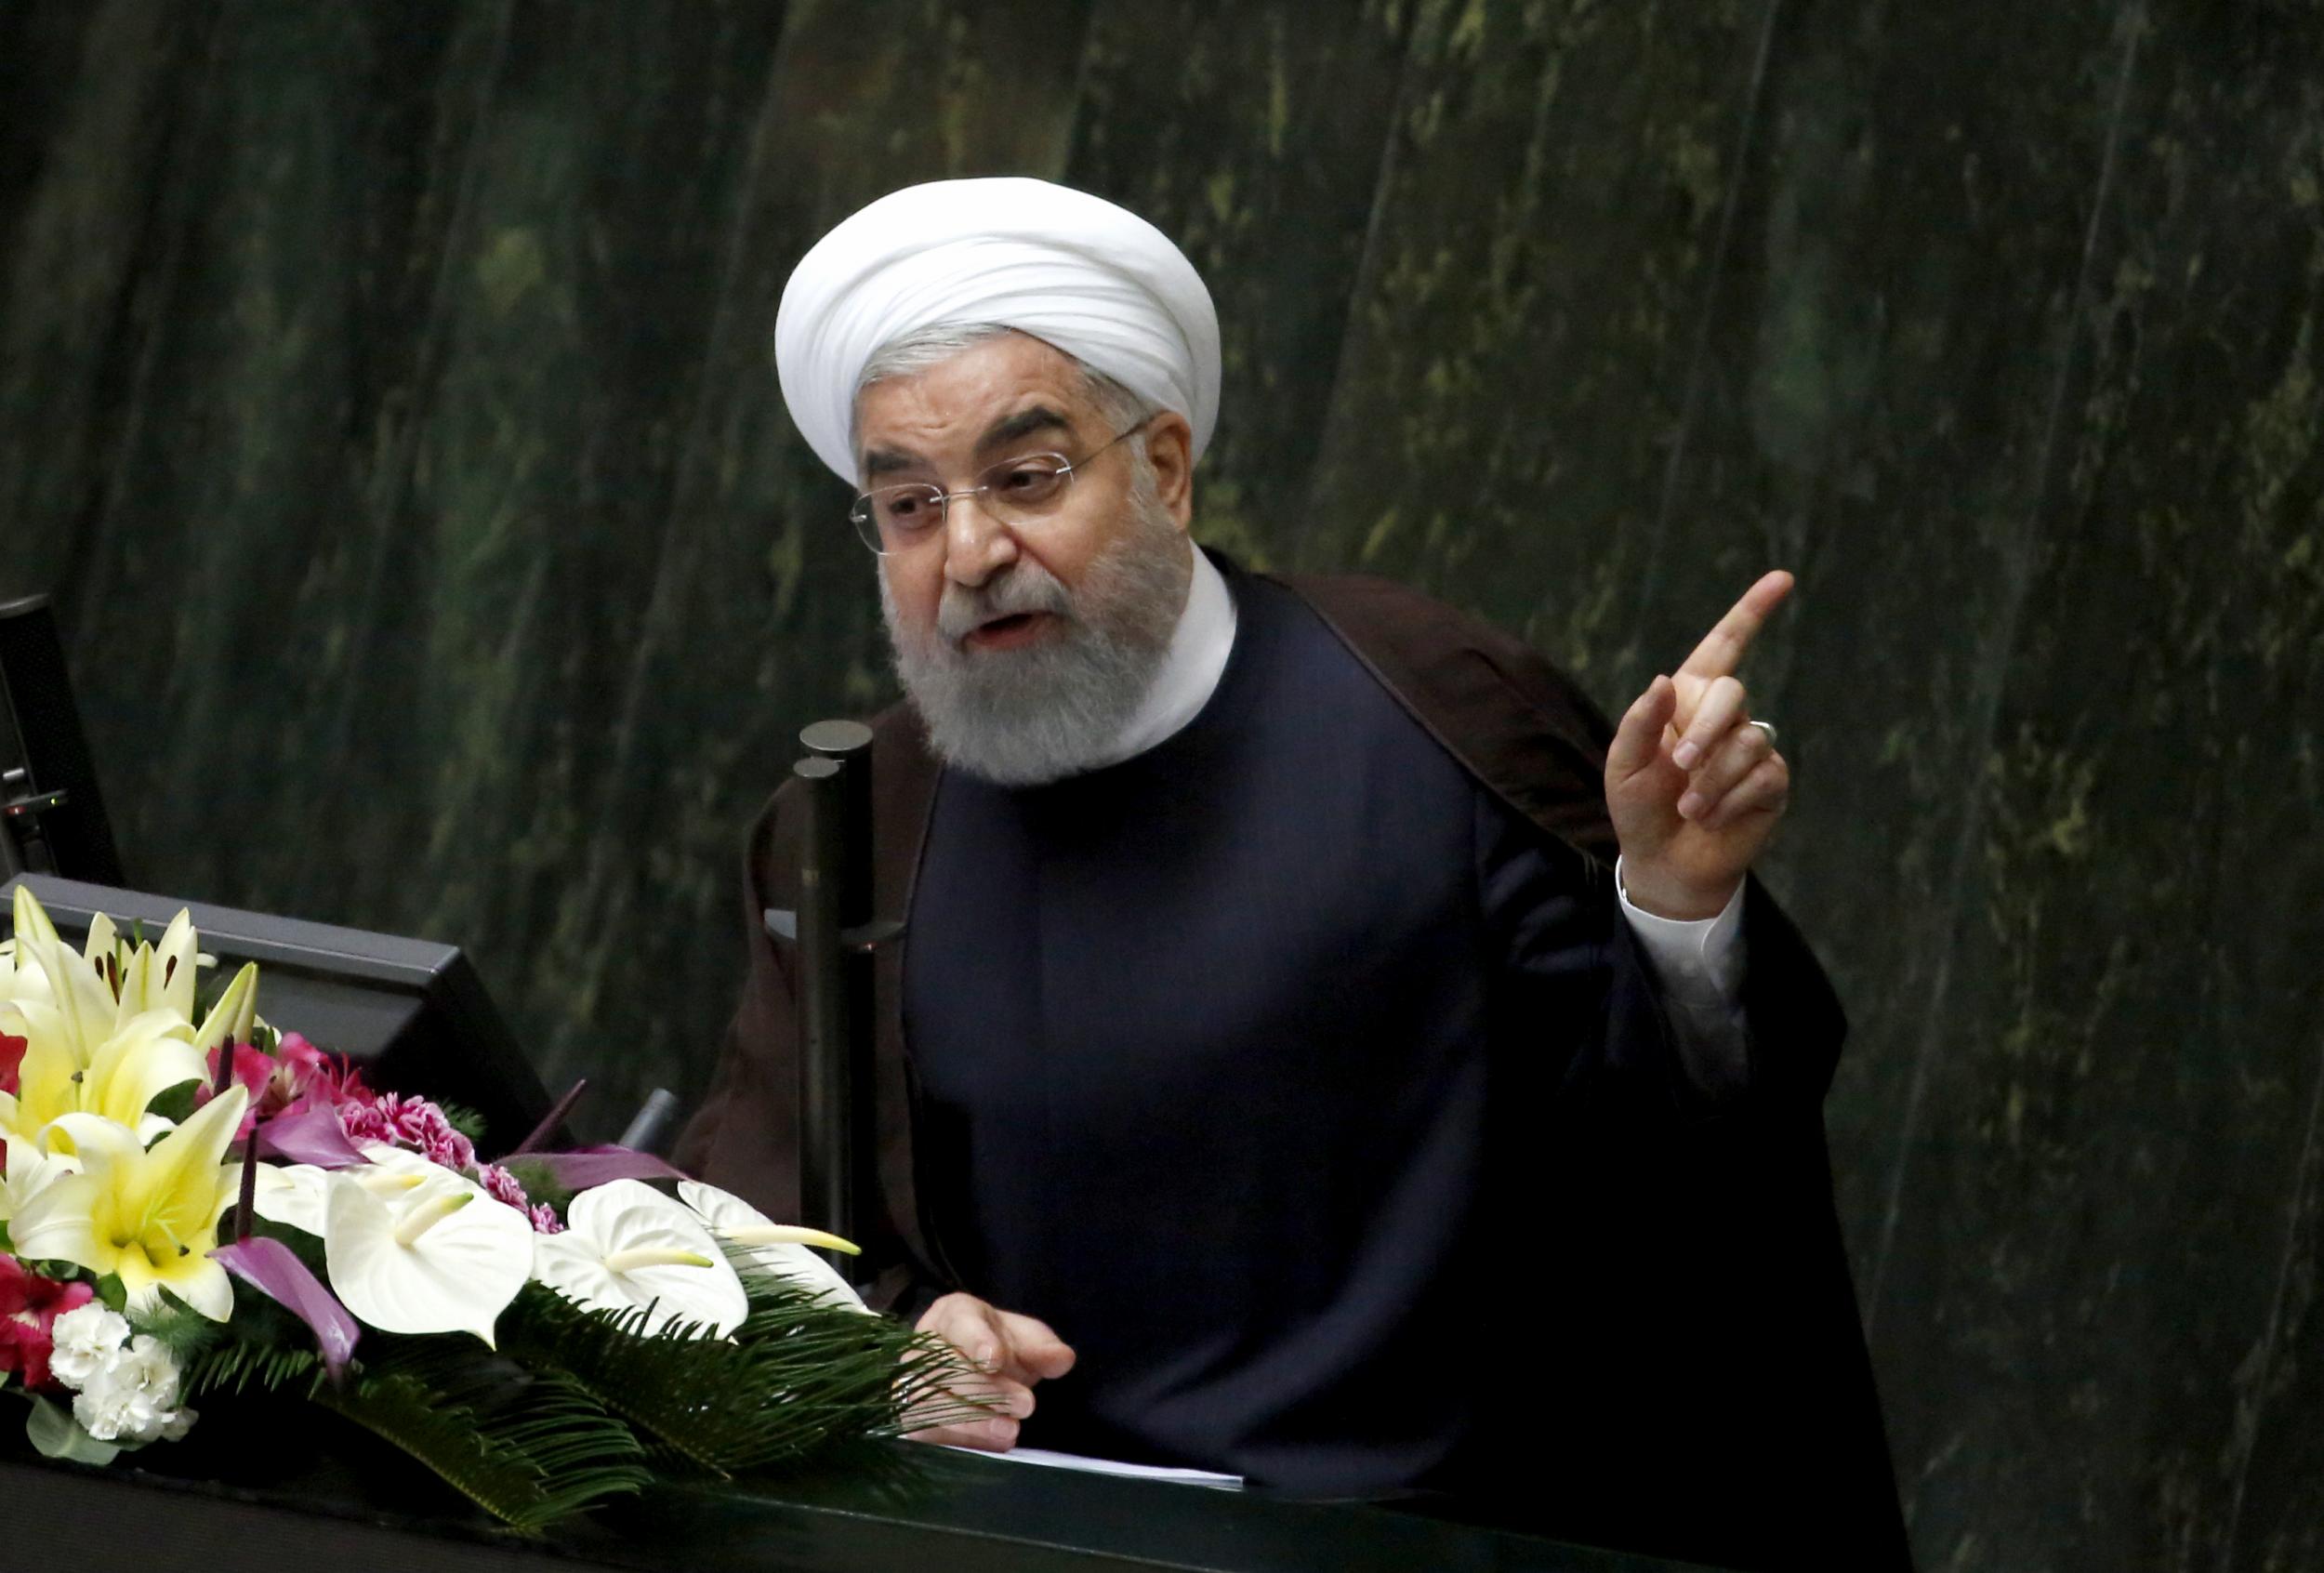 'In an hour and a day, Iran could return to a more advanced (nuclear) level than at the beginning of the negotiations' tha preceded the 2015 nuclear deal, President Rouhani said